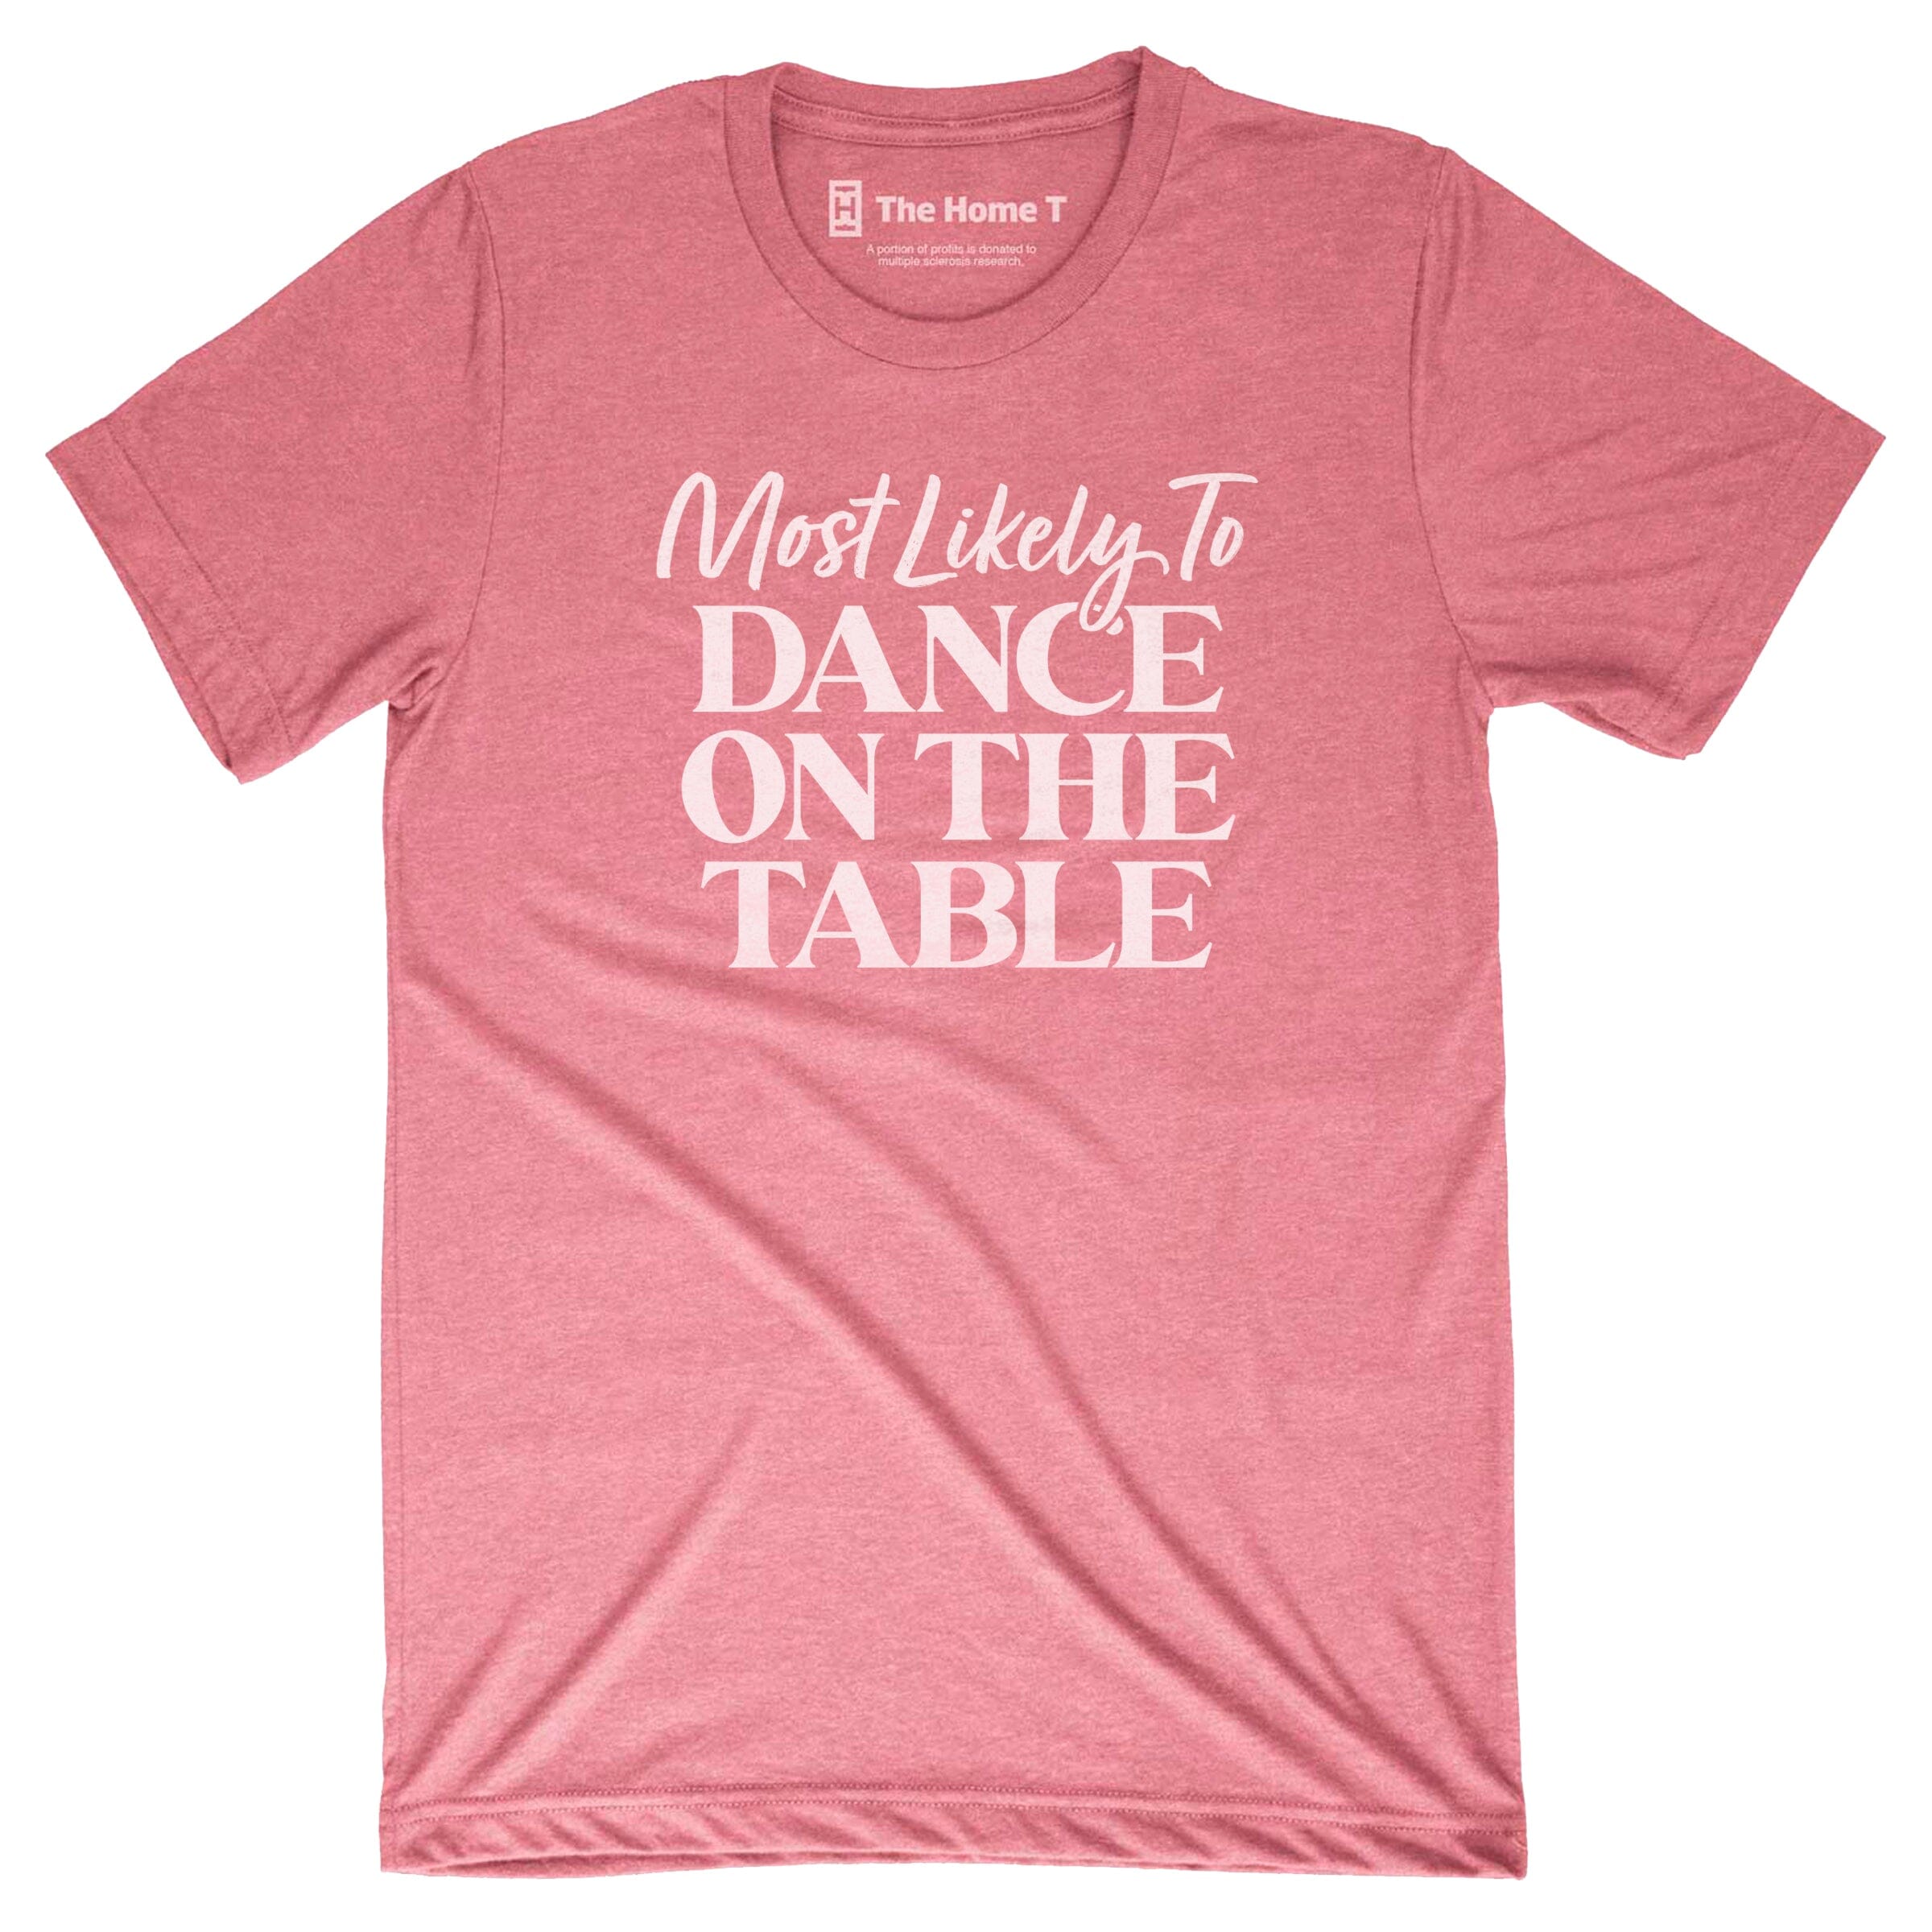 Most Likely to Dance on the Table